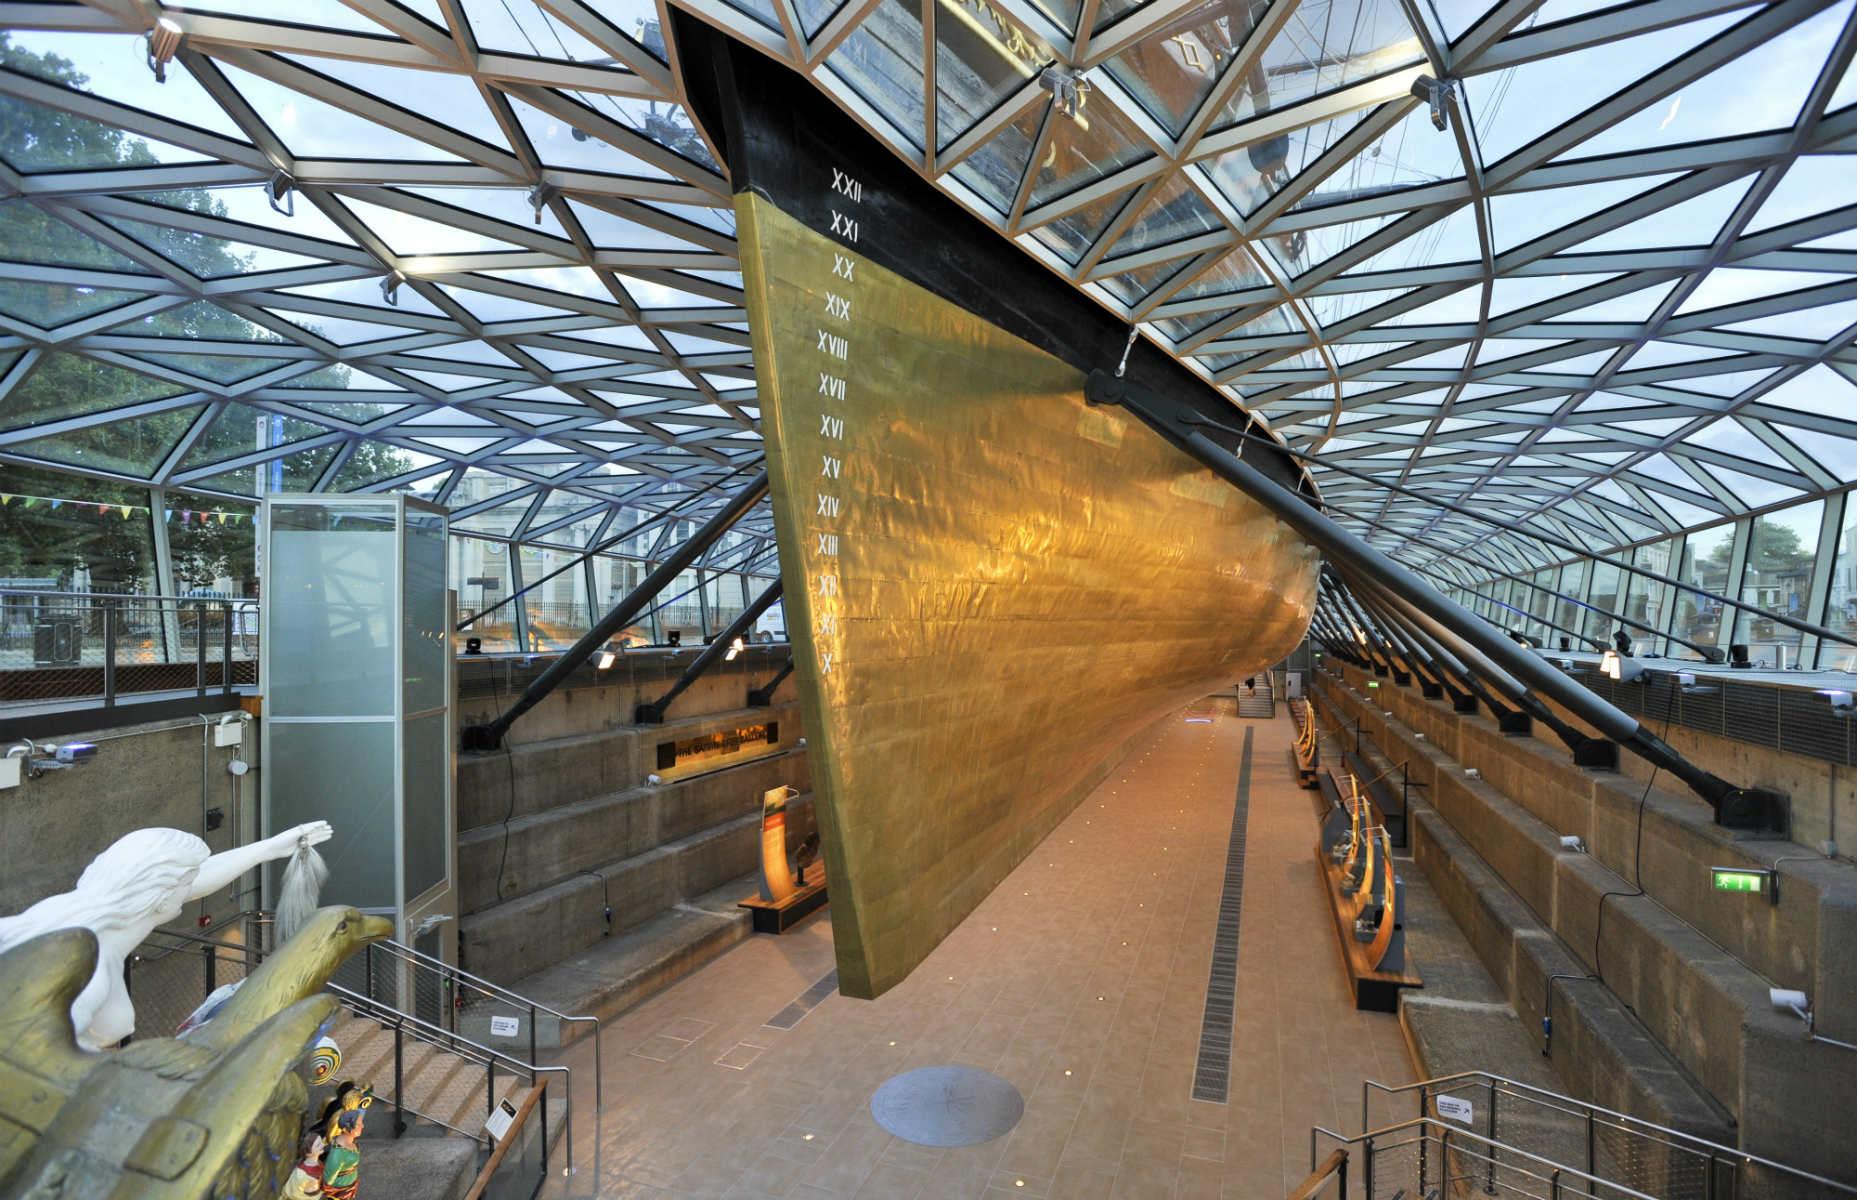 <p>You can walk beneath the hull, see the captain’s table and take the ship’s wheel (<a href="https://www.rmg.co.uk/cutty-sark">with pre-booked tickets</a>). Greenwich has a wealth of museums worth taking in, such as the Maritime Museum, Royal Observatory, the Queen’s House and Painted Hall, all part of the Naval College. And, naturally, the best way to get there is along the Thames on the Clipper ferry service.</p>